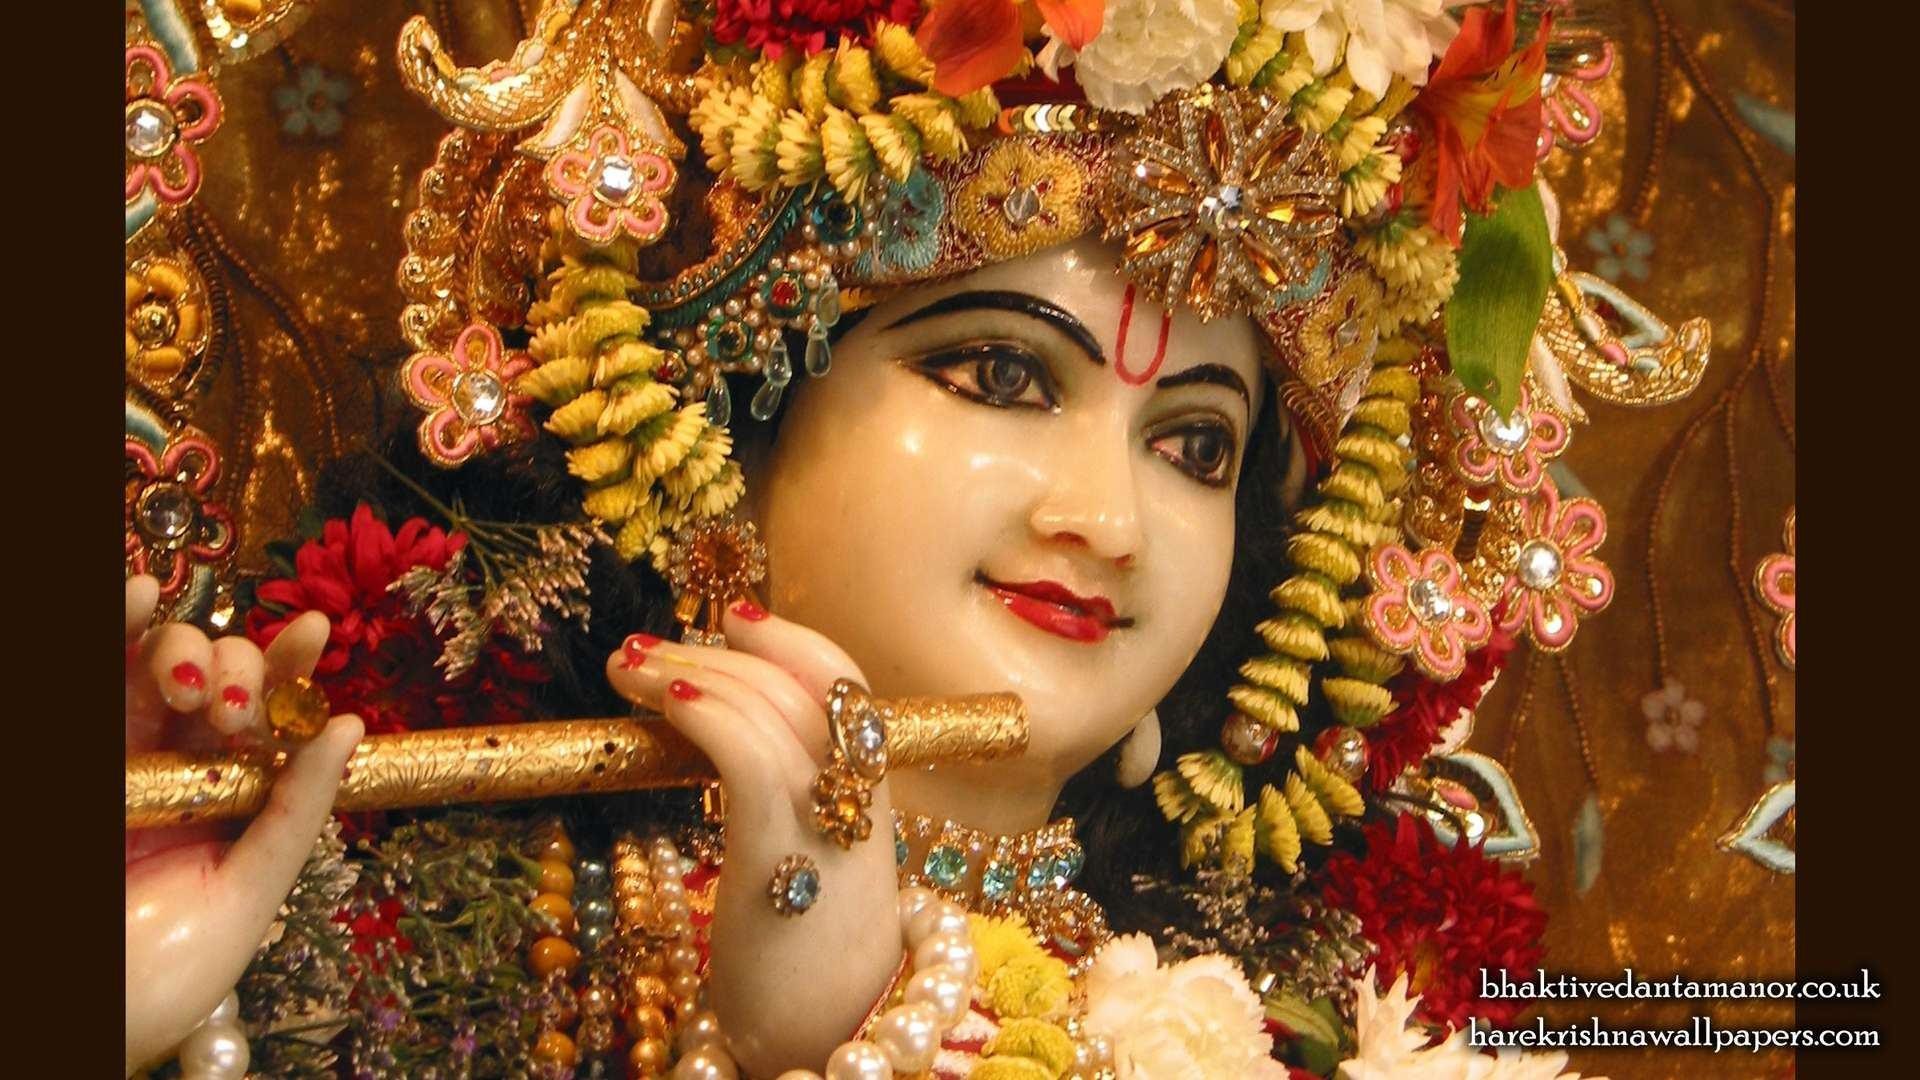 Lord Krishna Wallpaper 2018 (71+ pictures)